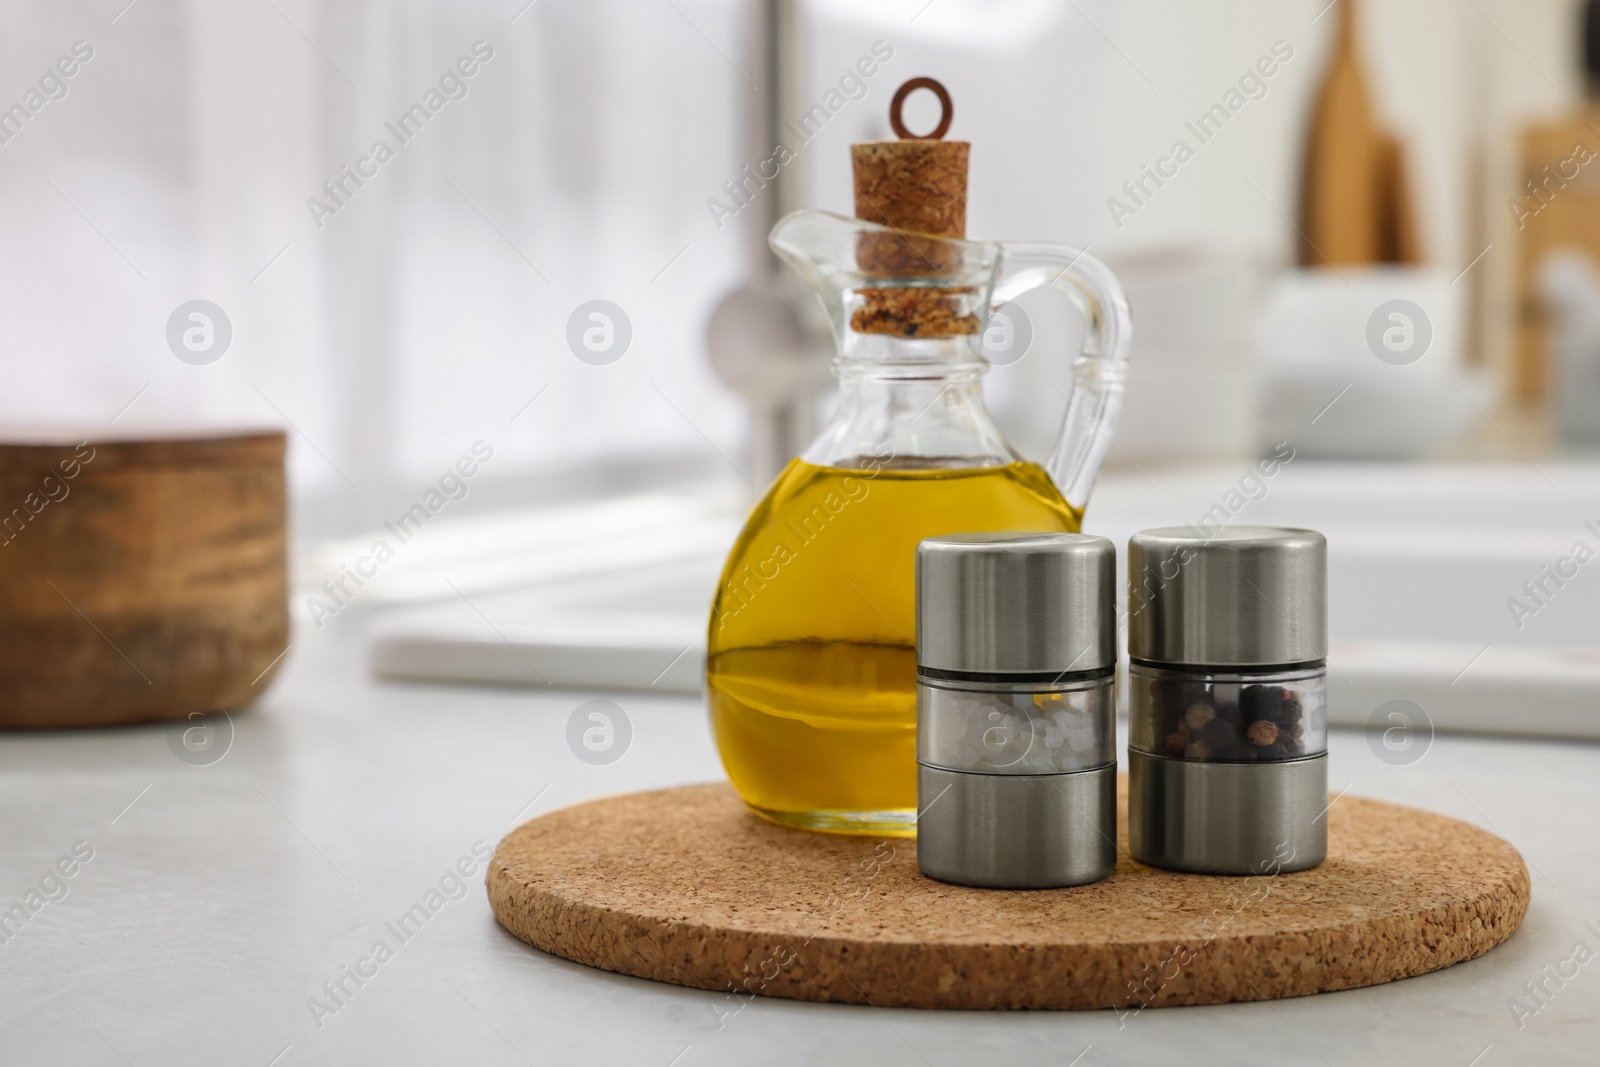 Photo of Salt and pepper mills with bottle of oil on table in kitchen. Space for text